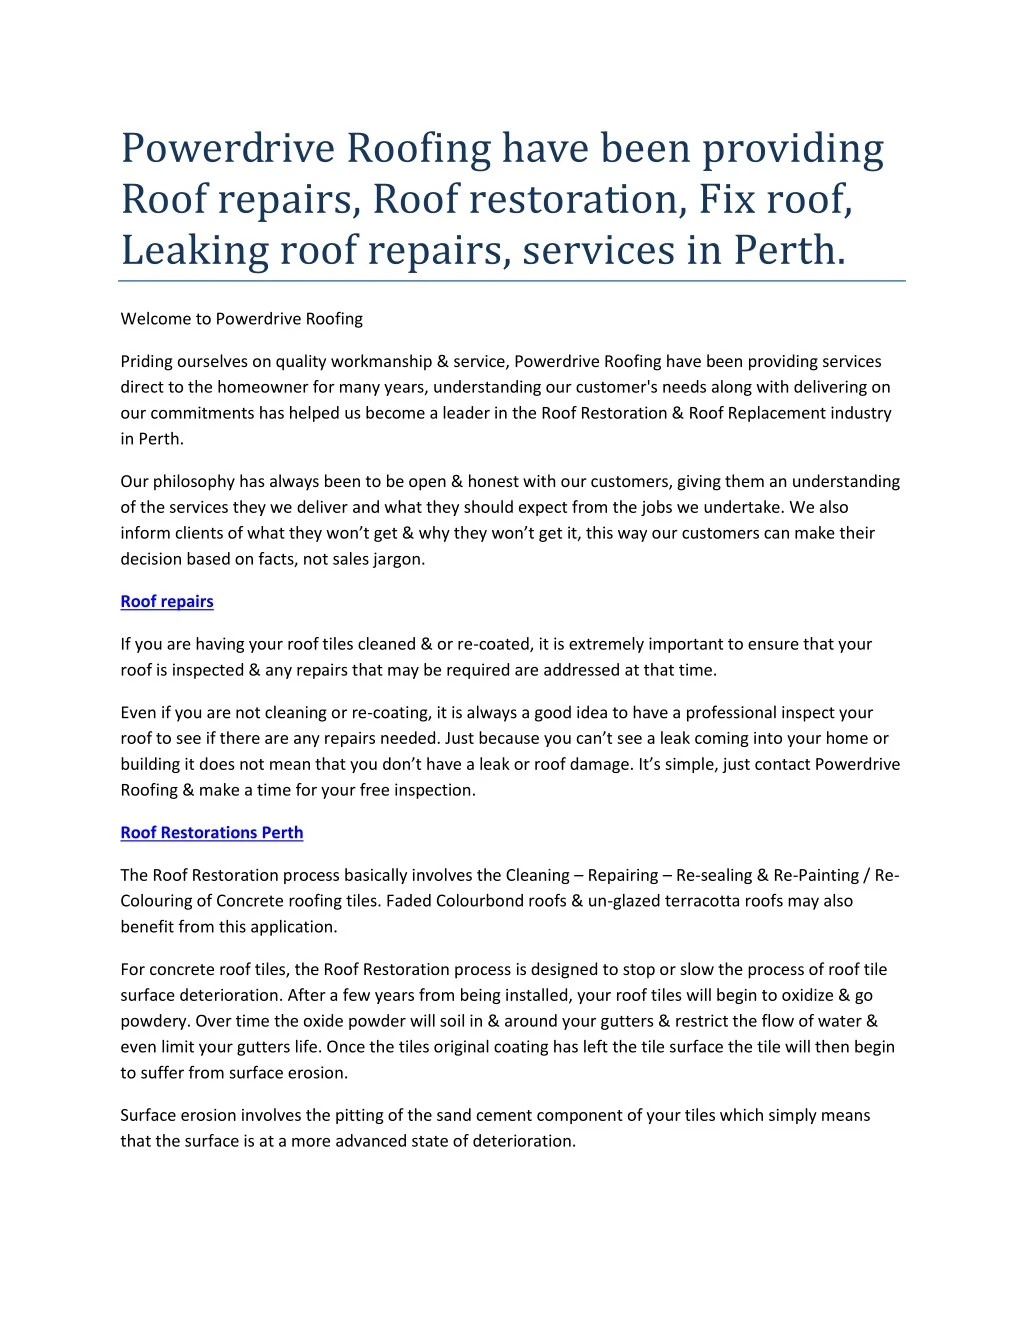 powerdrive roofing have been providing roof